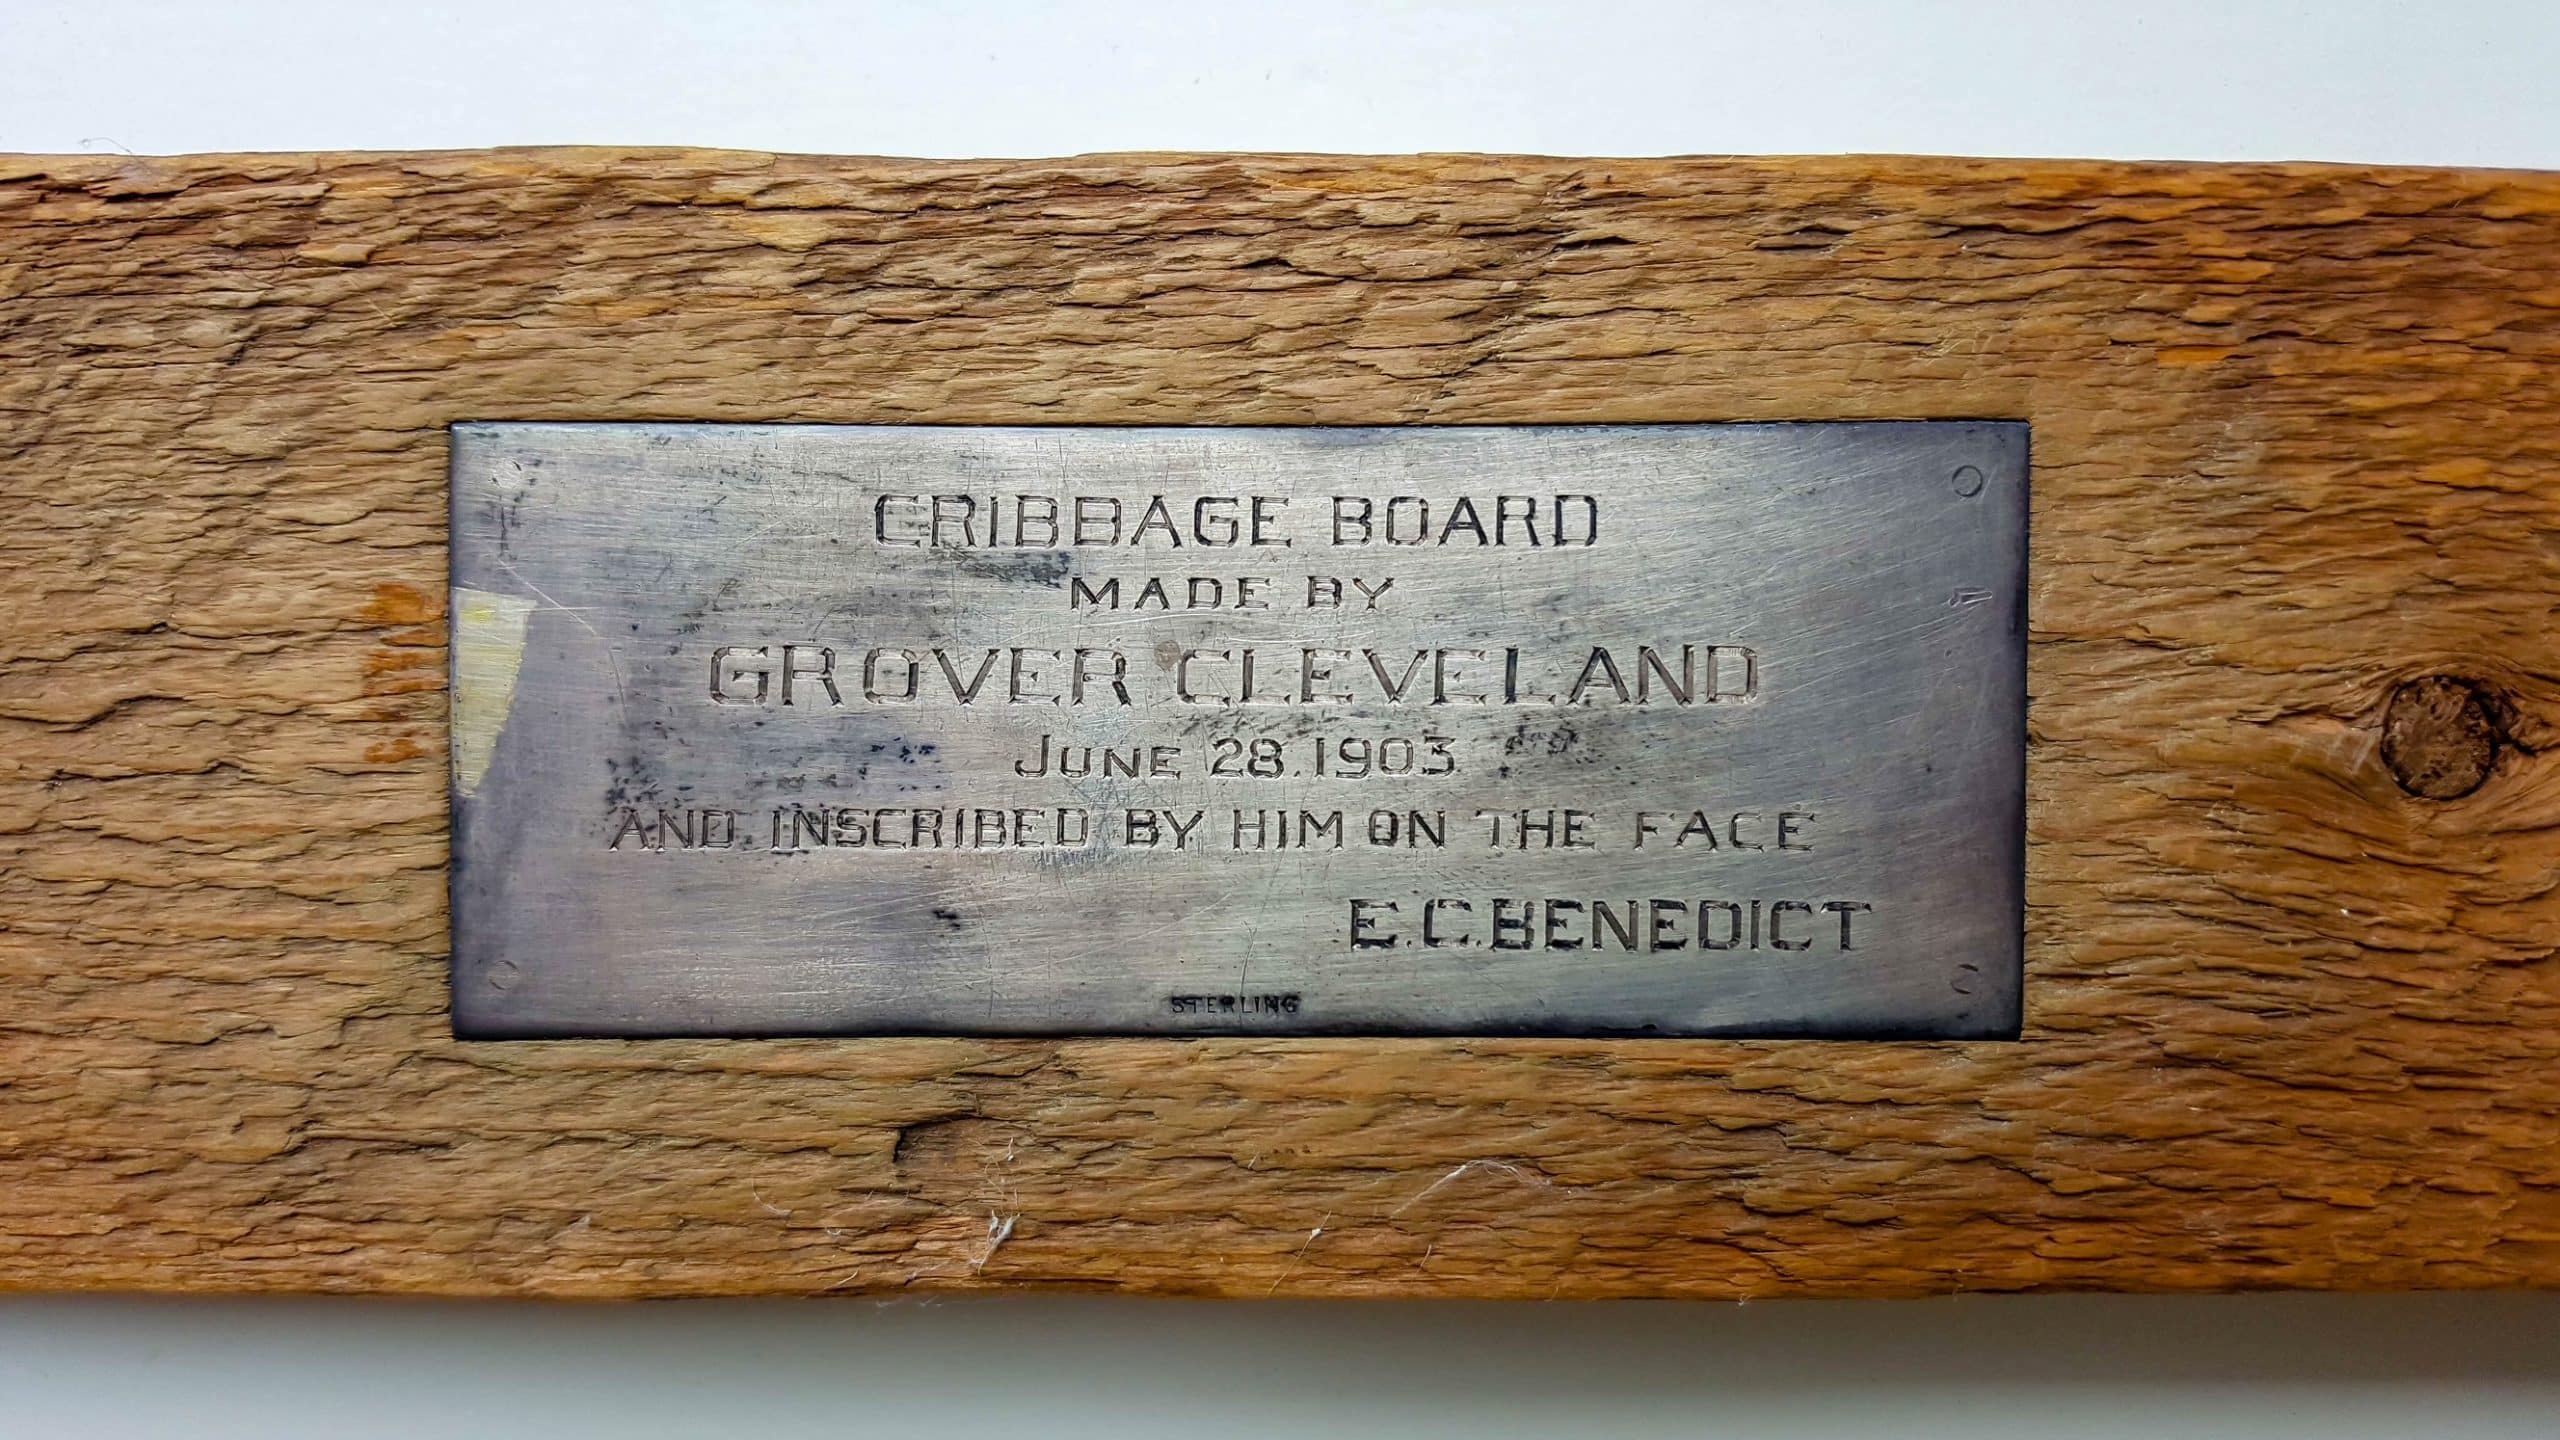 Cribbage board by President Grover Cleveland